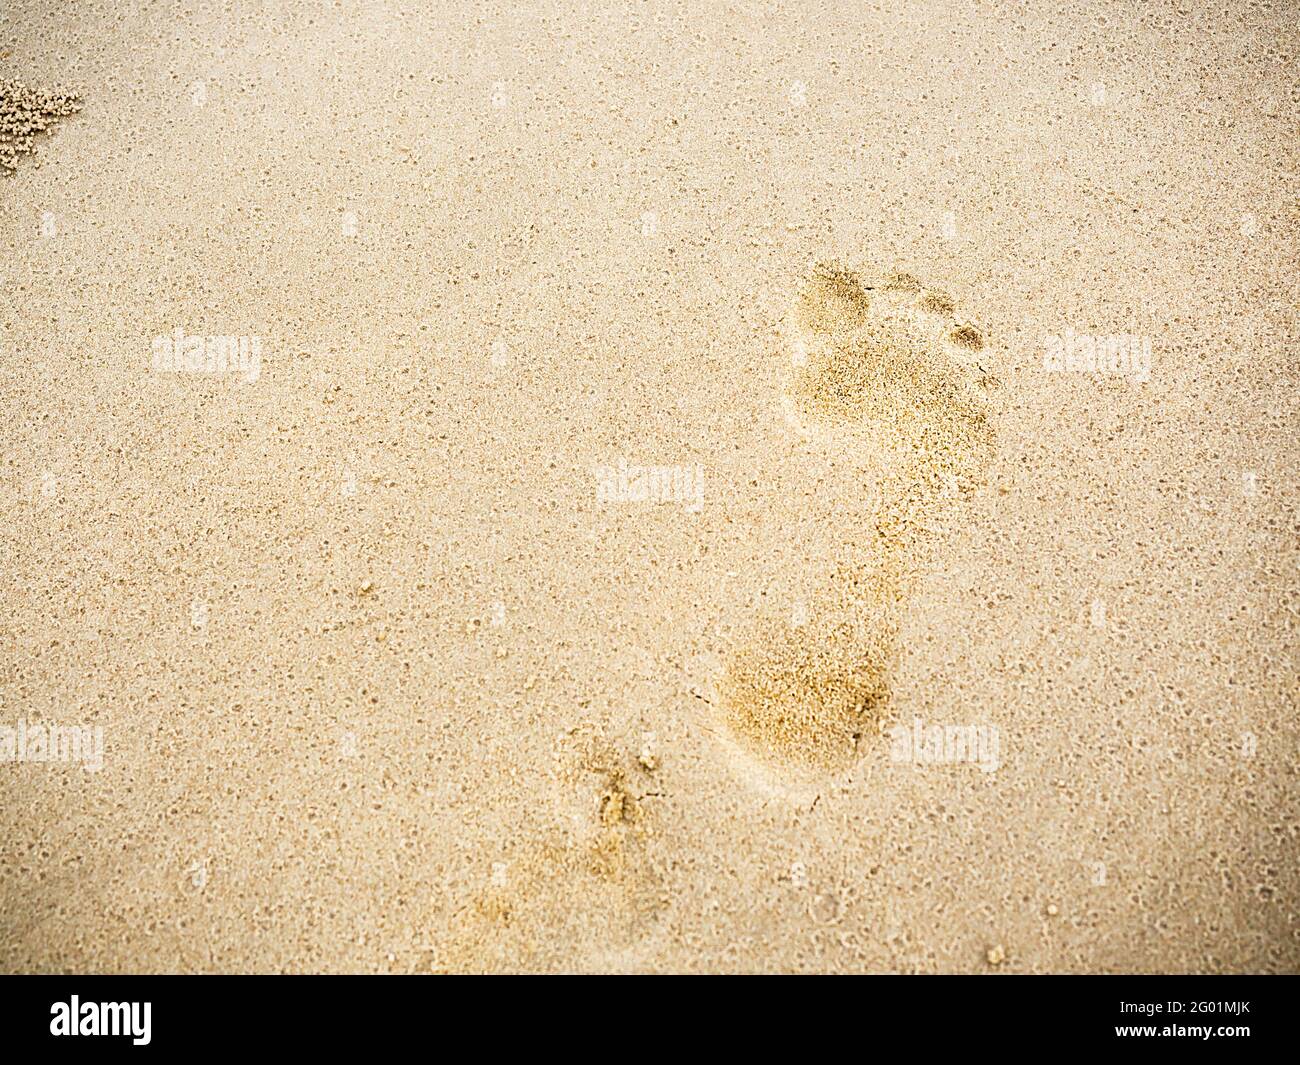 Beach Sand Footprints With Copy Space Close Up Human Footprint From Walking Barefoot On The